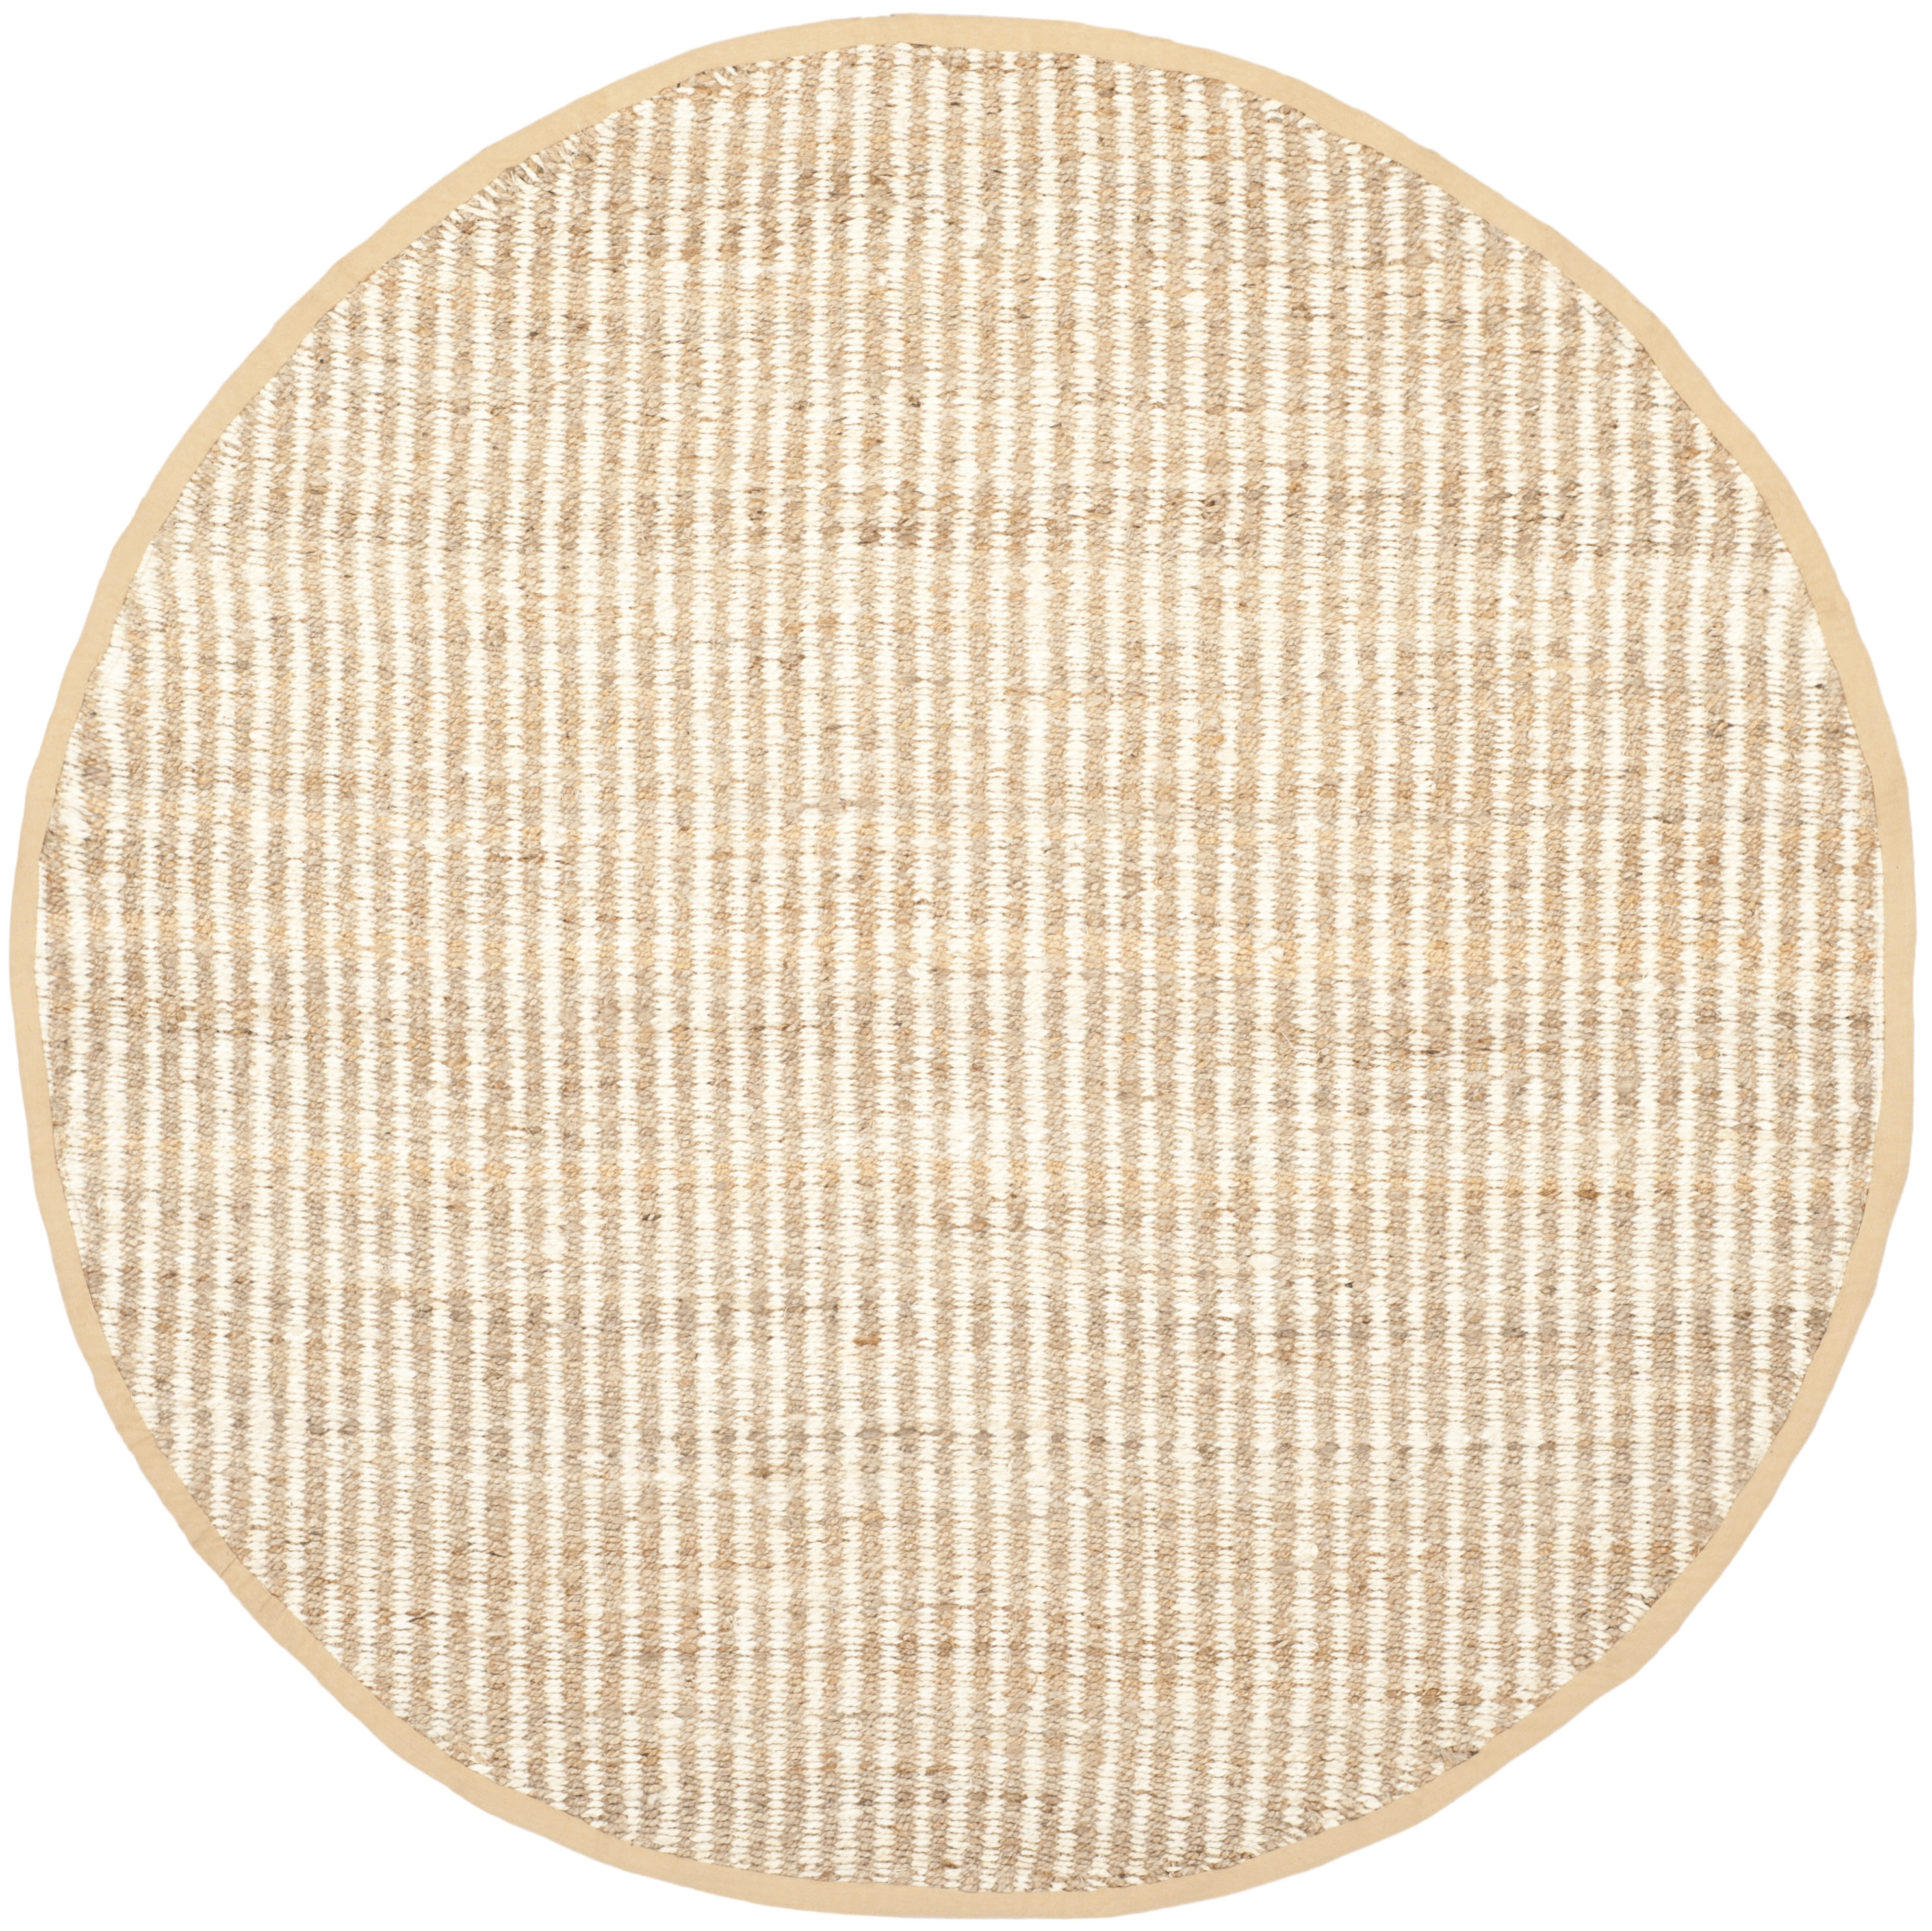 Arlo Home Hand Woven Area Rug, NF734A, Natural/Ivory,  7' X 7' Round - Image 0